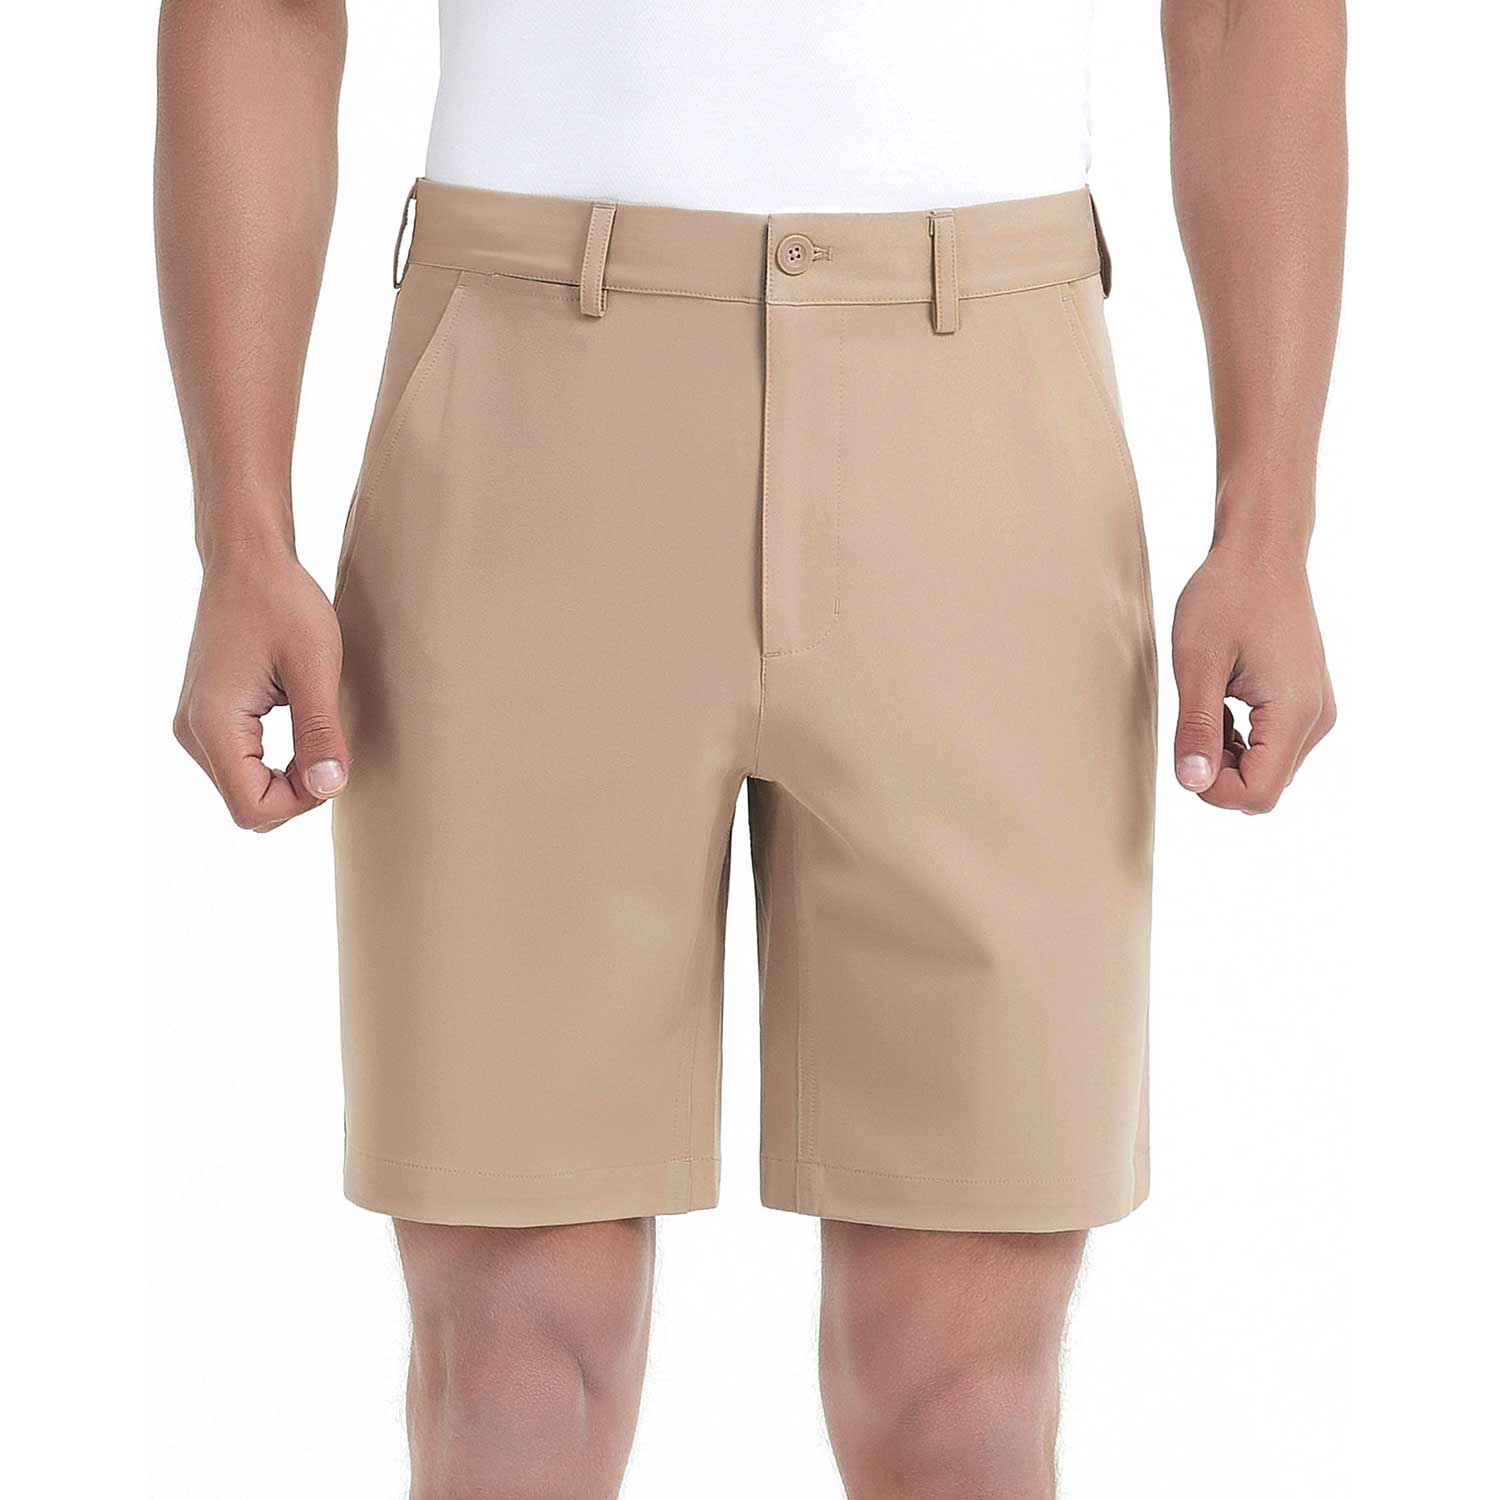 Lesmart Men's Dry Fit Golf Stretch Shorts with Pockets | Men's White ...